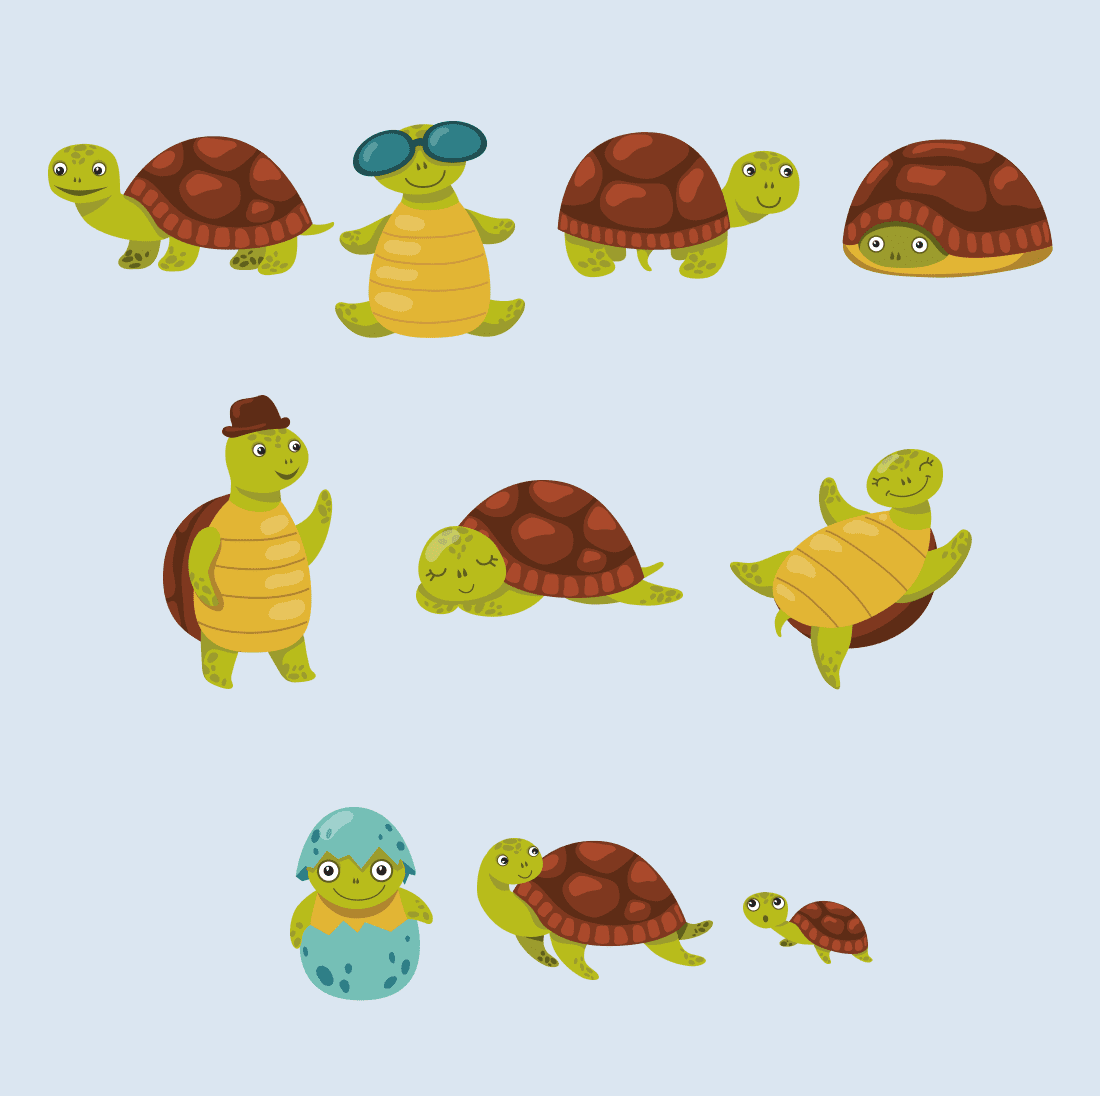 Group of turtles in different positions on a blue background.